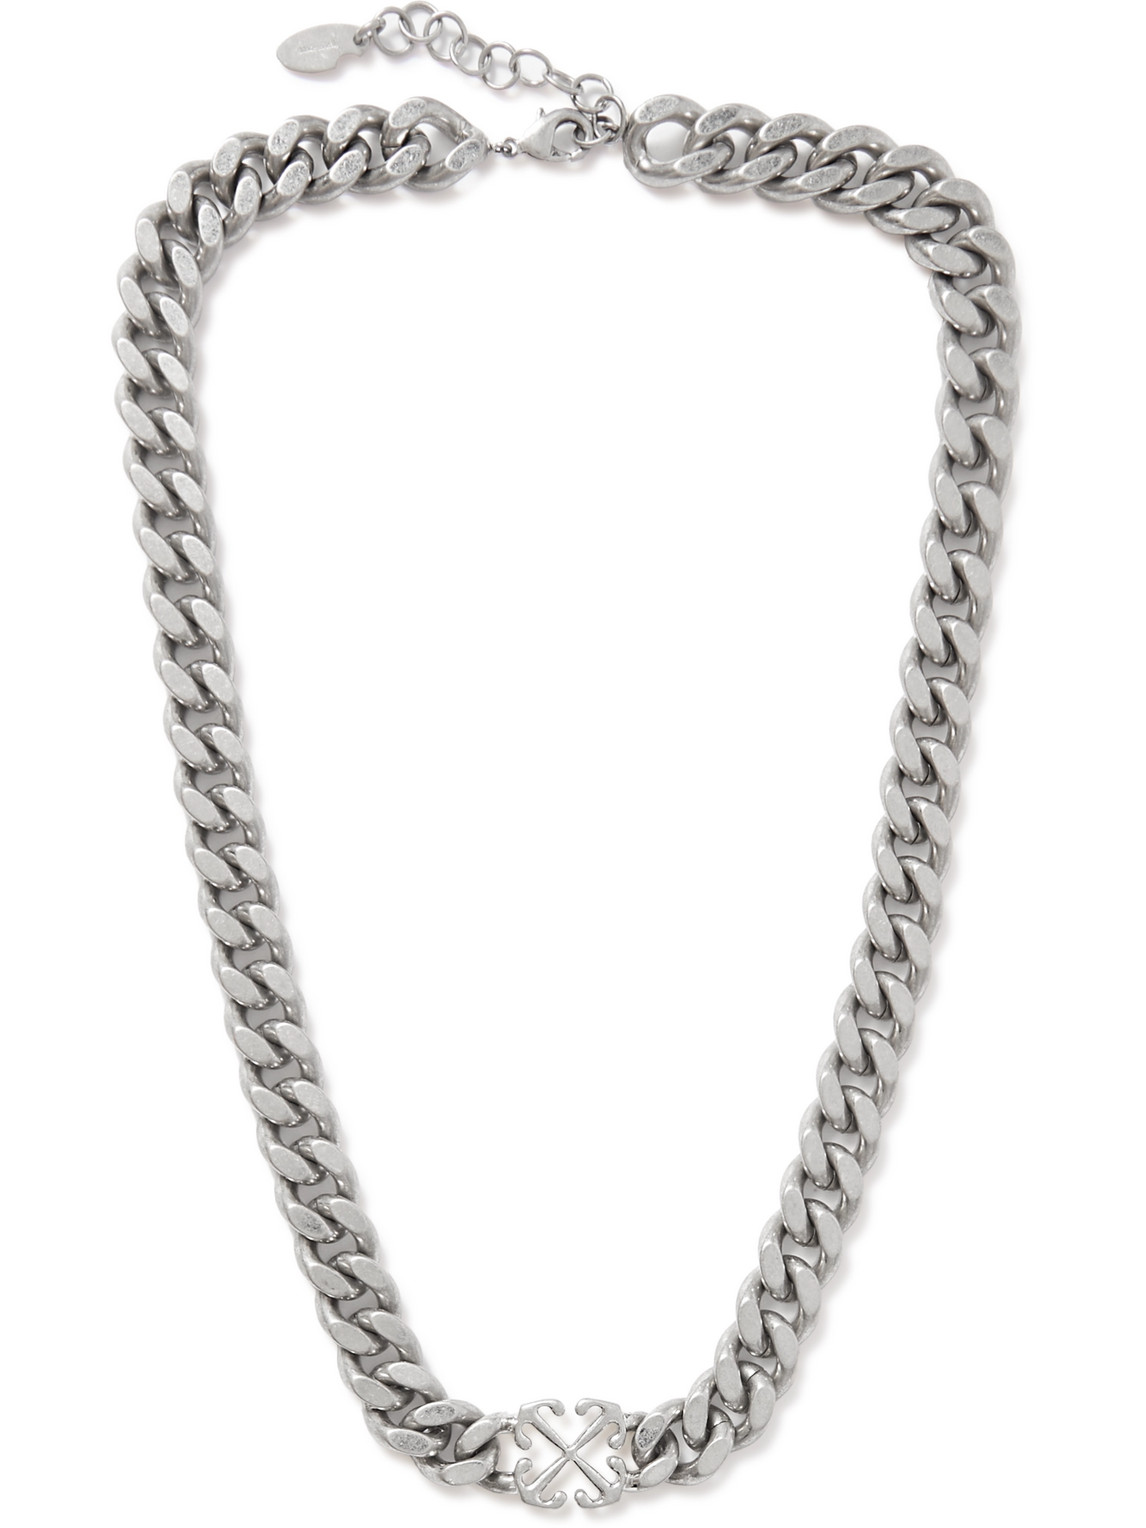 Off-White c/o Virgil Abloh Silver Short Multi Paperclip Necklace